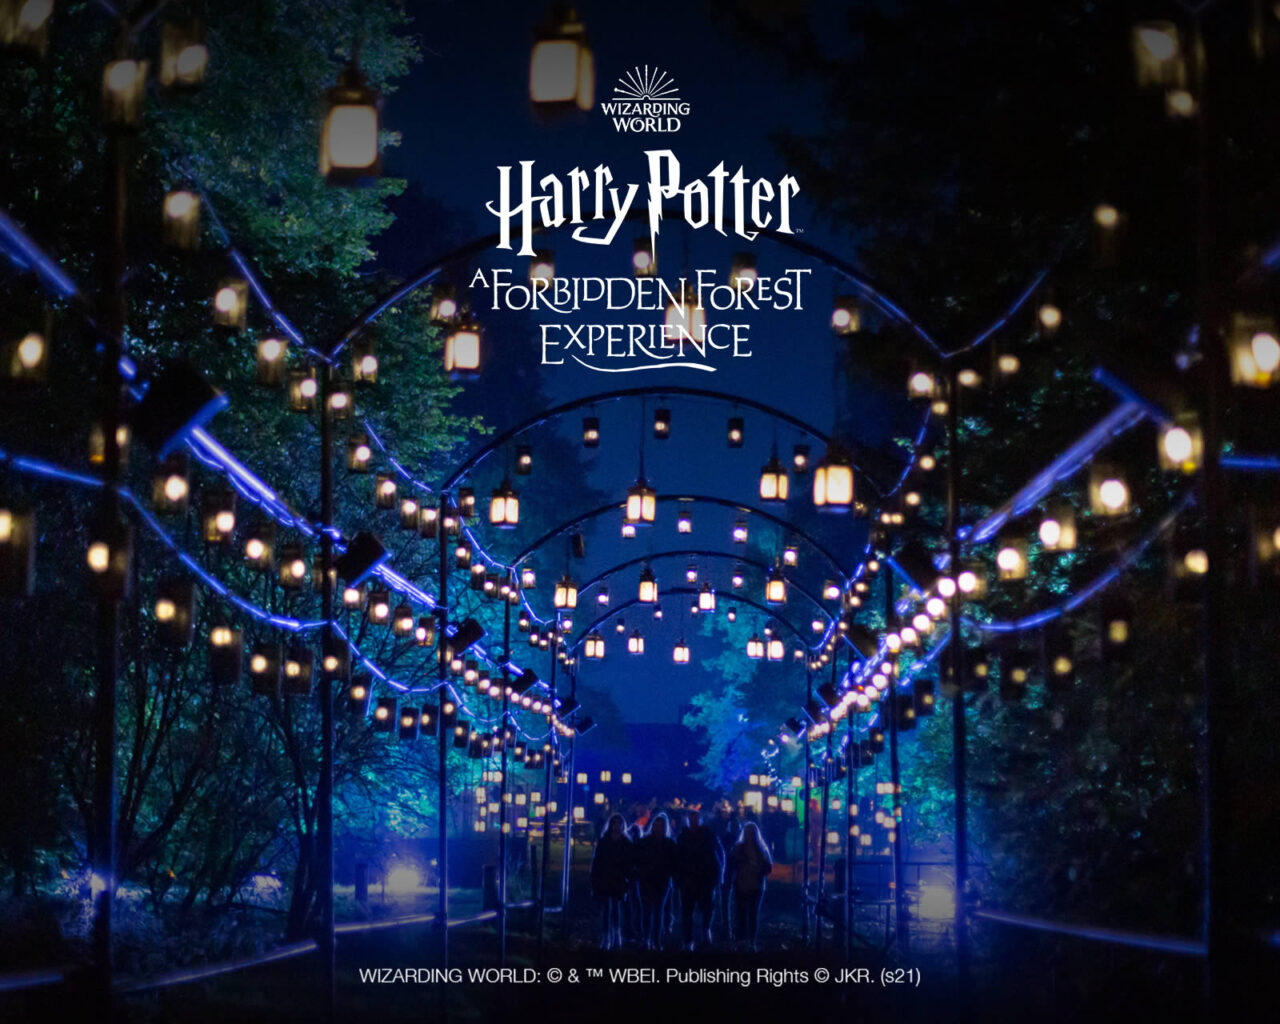 Harry Potter Forbidden Forest Experience Forbidden Forest Experience Harry Potter A Forbidden Forrest Experience In 2022, two forests in the USA and two in the UK!